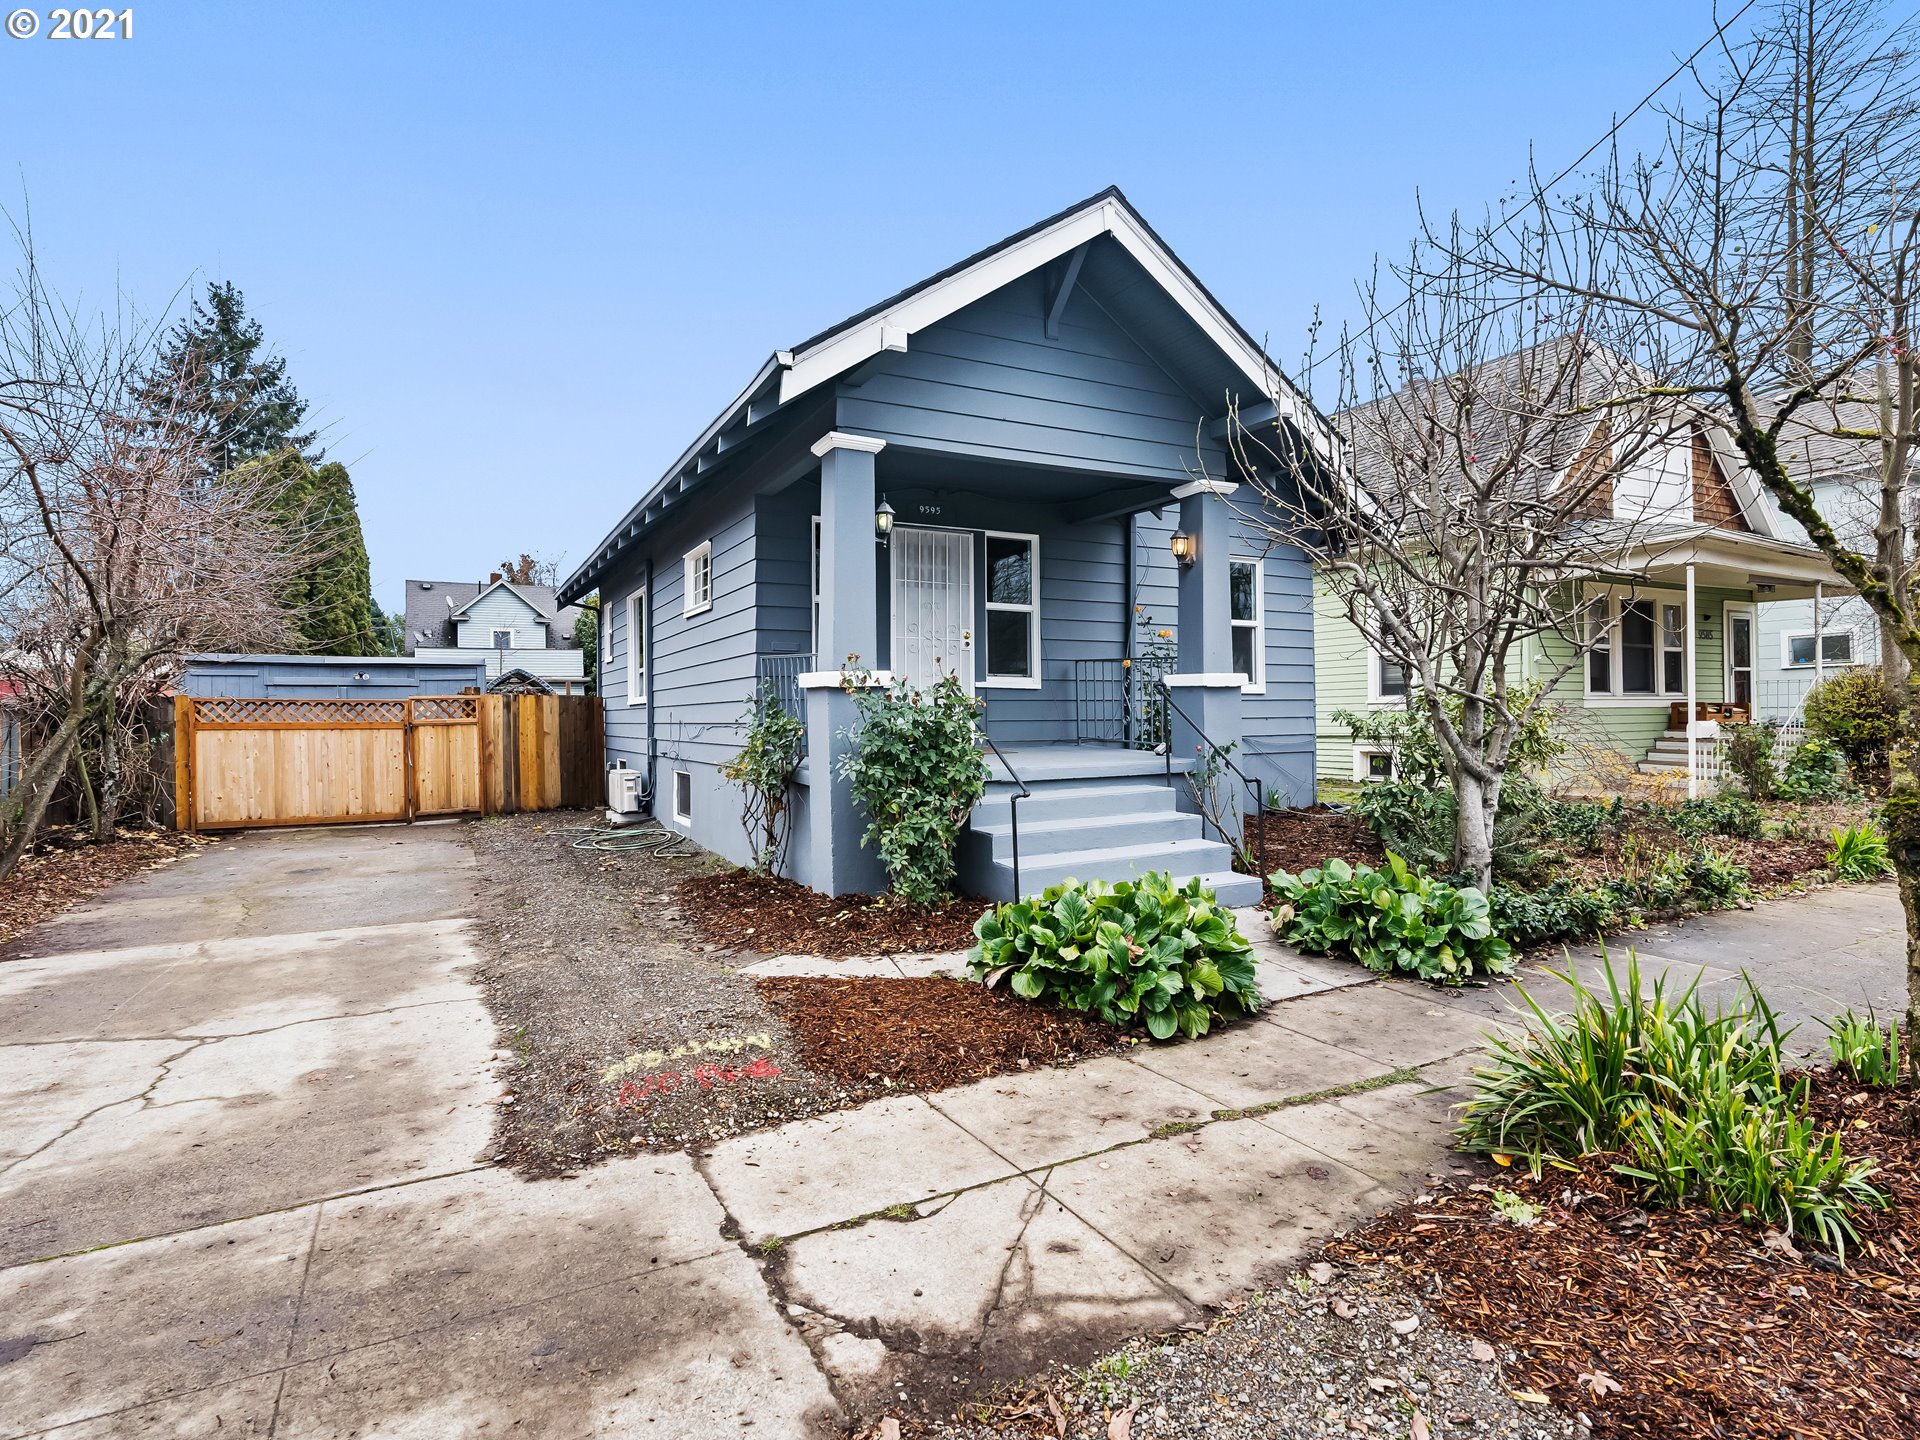 9595 N LOMBARD ST (1 of 32)